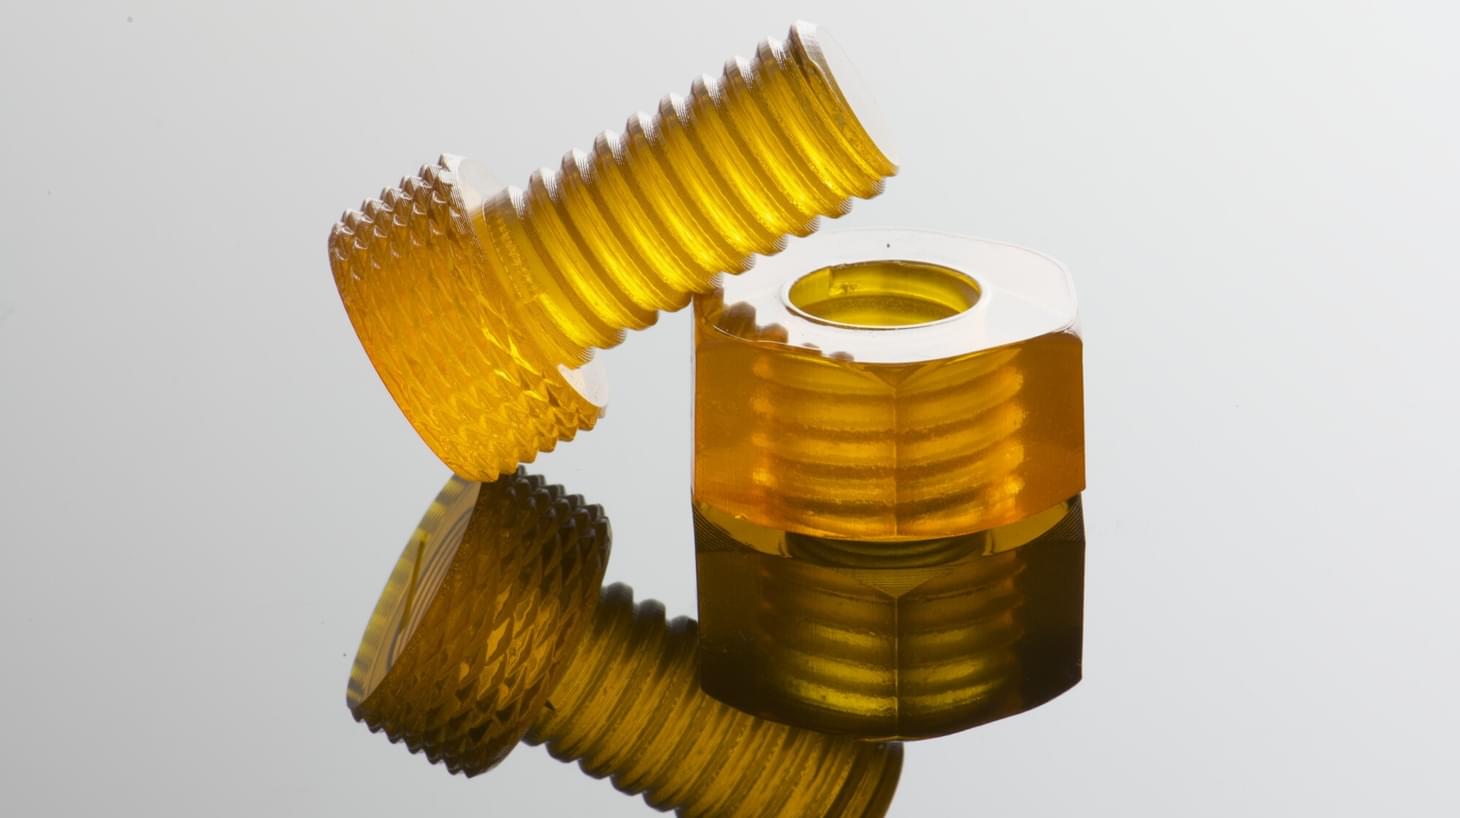 3d printed nut and bolt made of polySpectra material